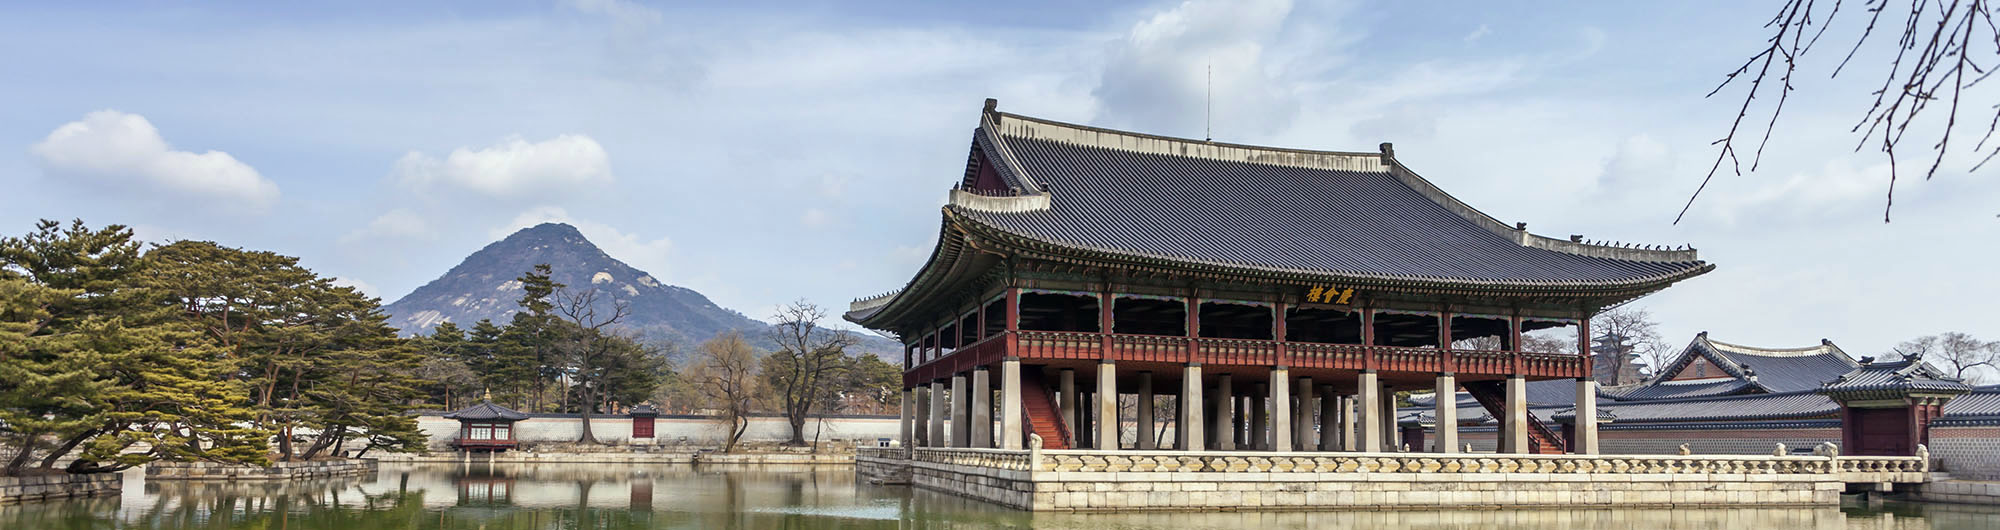 Search and compare cheap flights from Sendai-shi to Seoul